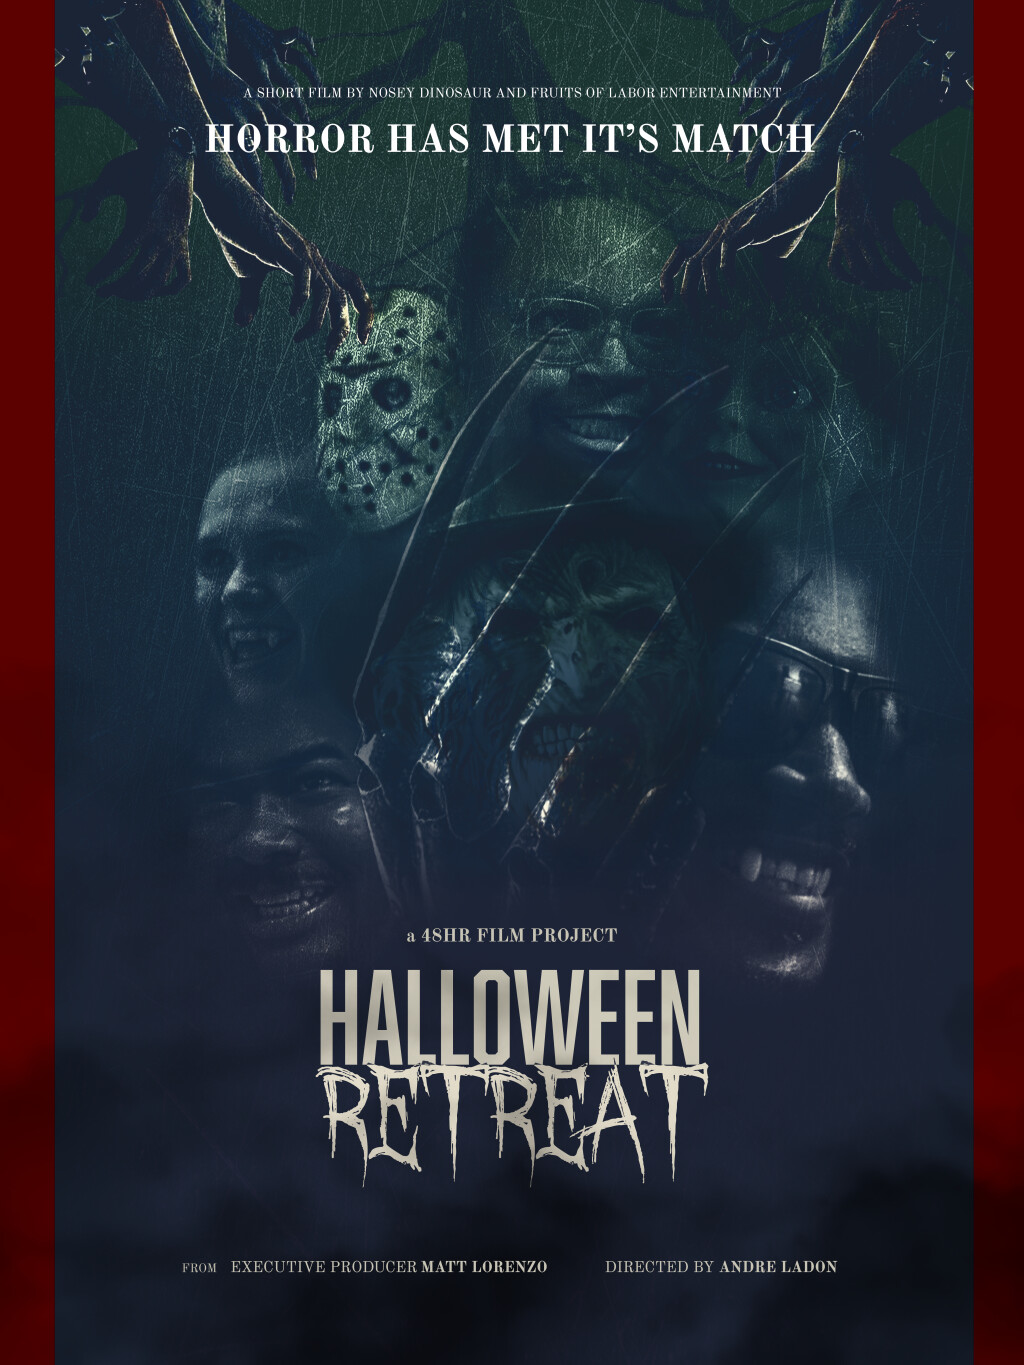 Filmposter for Halloween Re-Treat